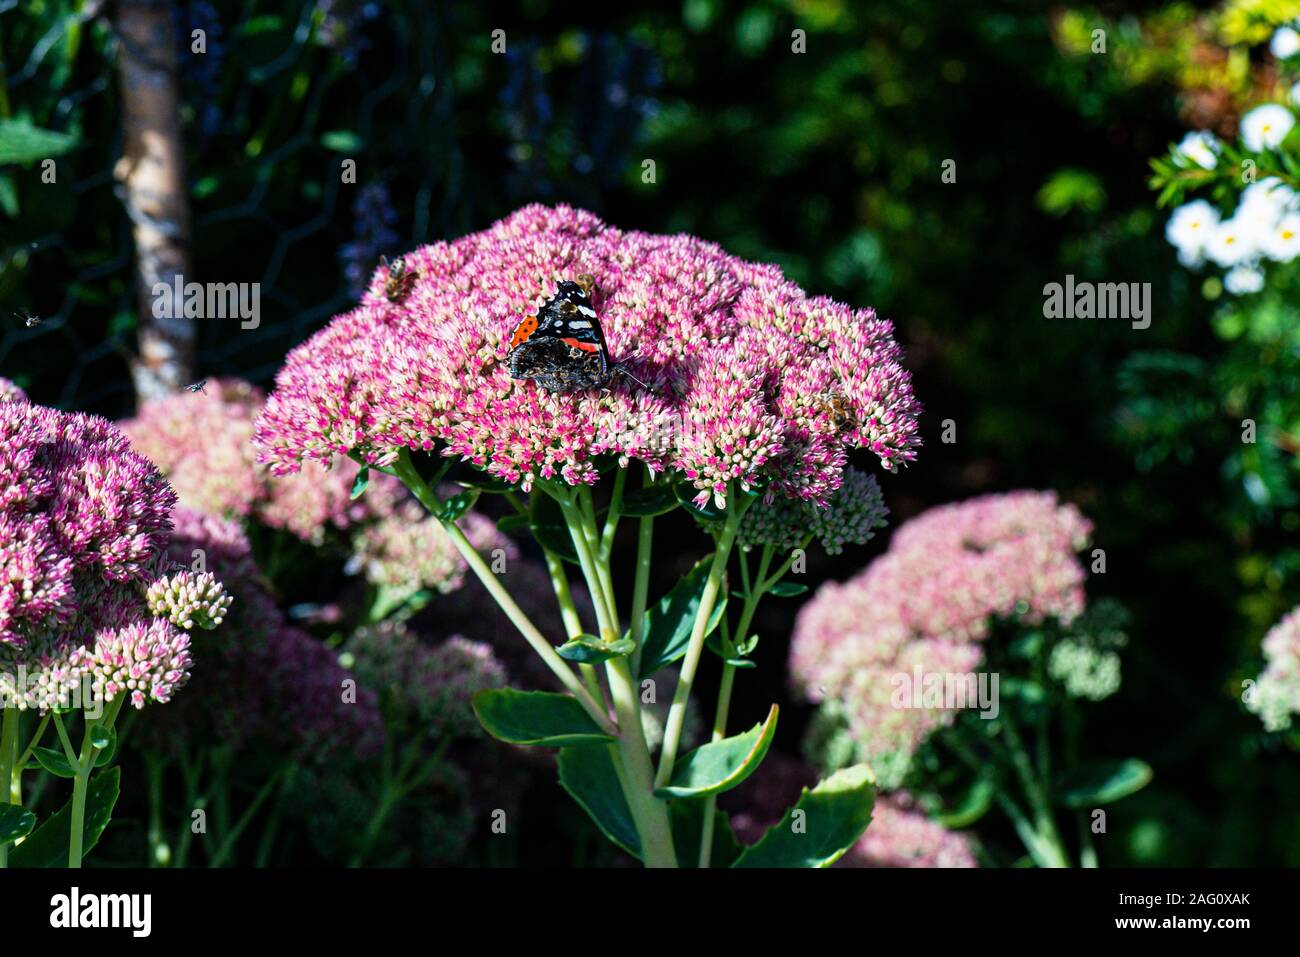 A red admiral butterfly (Vanessa atalanta) on the flowers of a showy stonecrop (Hylotelephium spectabile) Stock Photo